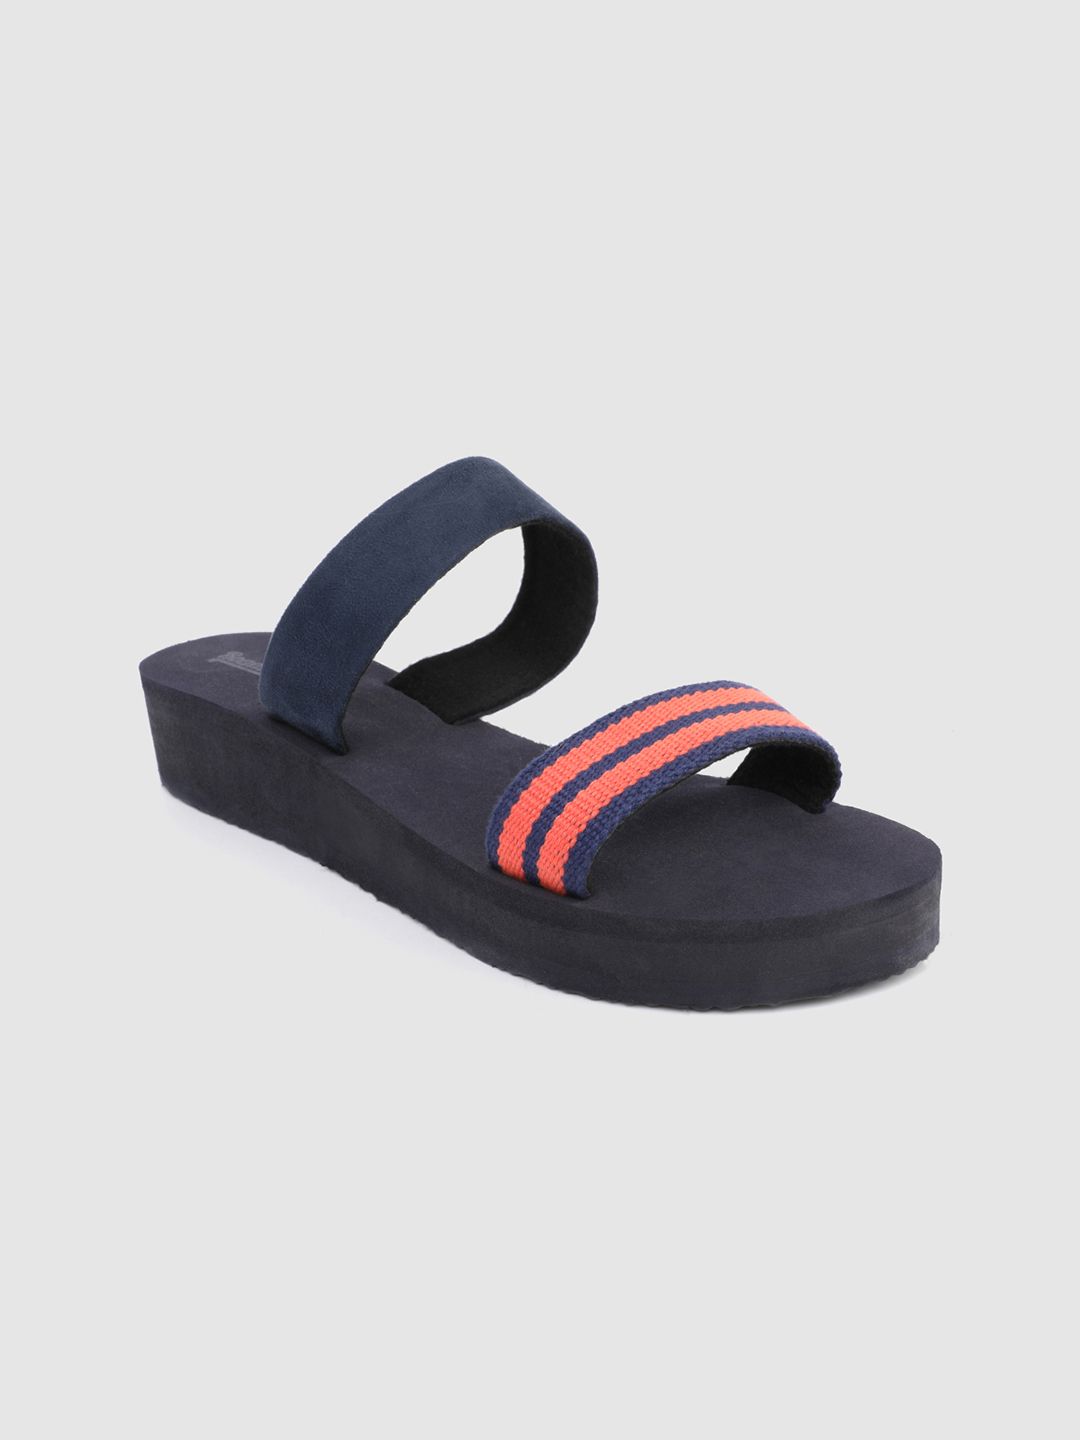 The Roadster Lifestyle Co Women Navy Blue & Peach-Coloured Striped Flip Flops Price in India